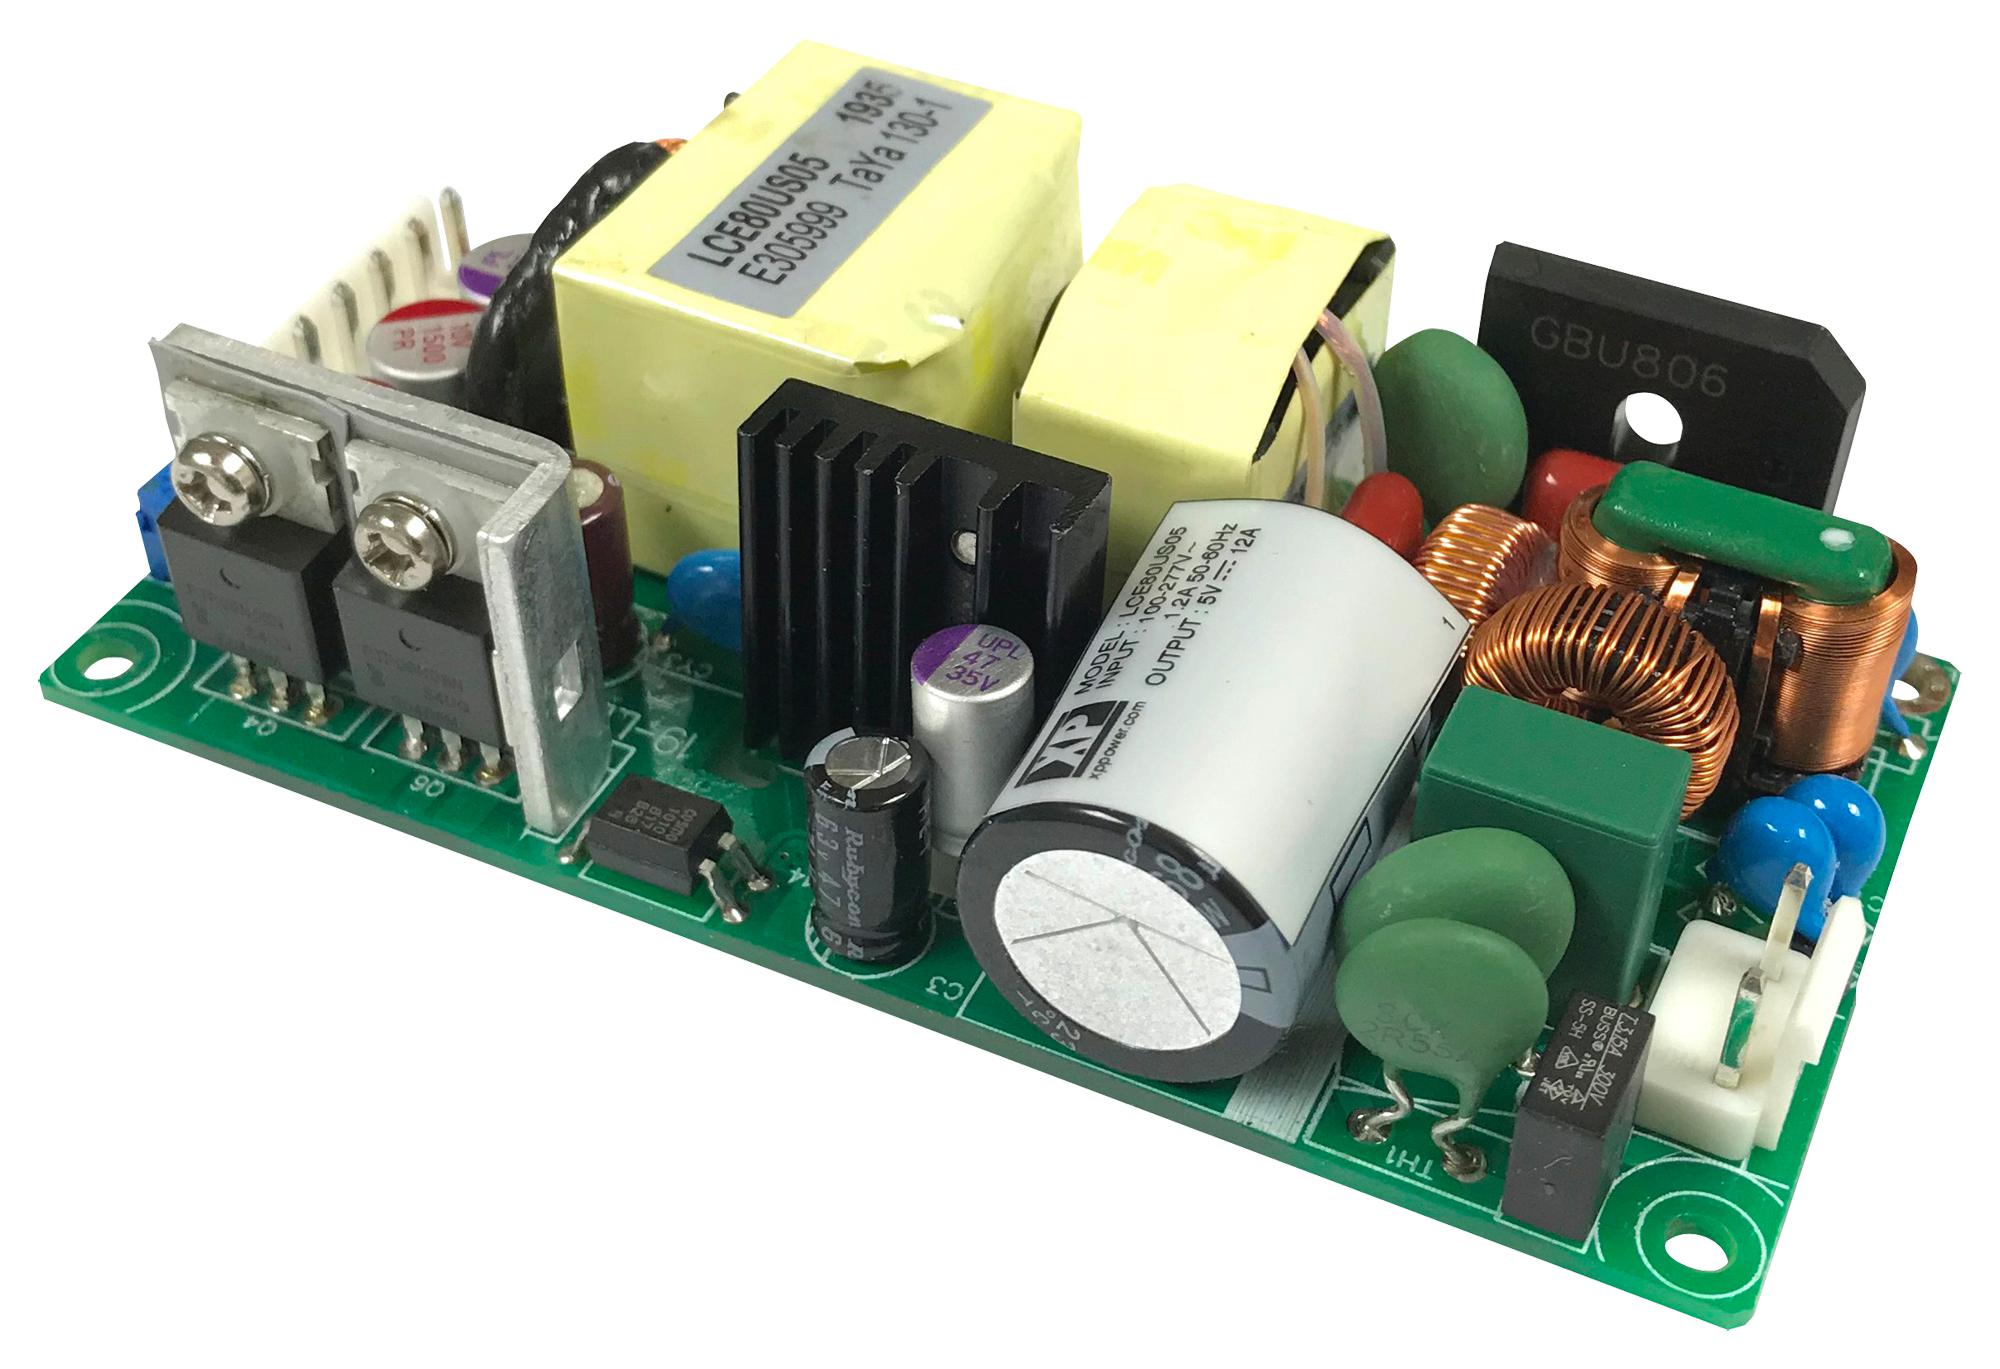 LCE80PS05 POWER SUPPLY, AC-DC, 5V, 12A XP POWER